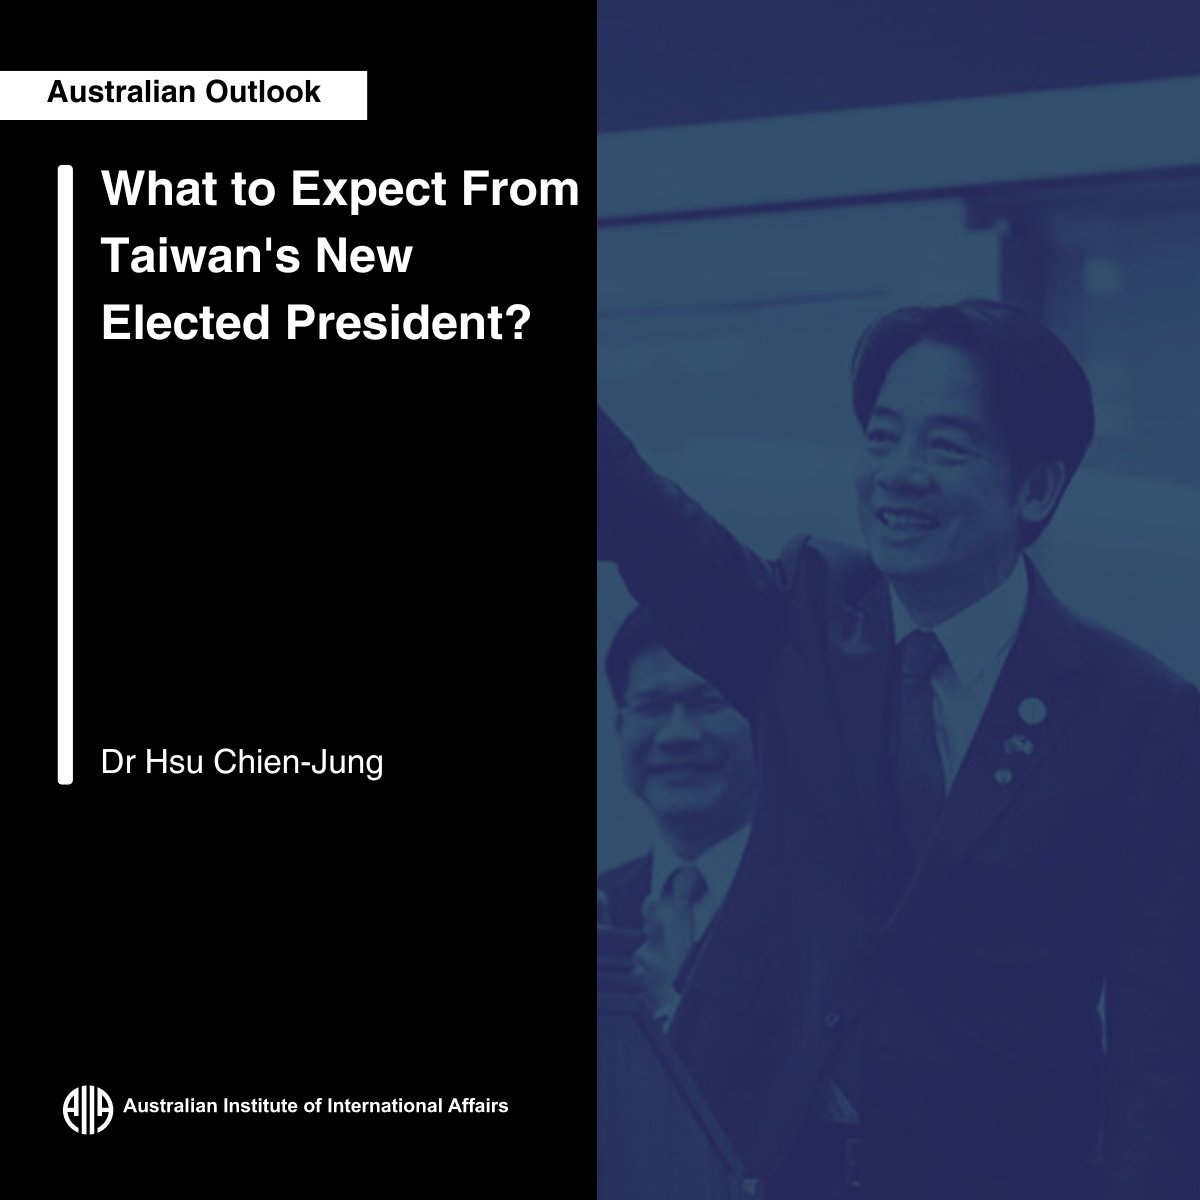 “The DPP did not secure a majority in parliamentary seats, which could have a serious impact on the future legislative agenda and national budget of the DPP government,” discussed by Dr Hsu Chien-Jung Read more at Australian Outlook👇 ow.ly/1SQ450R75fM